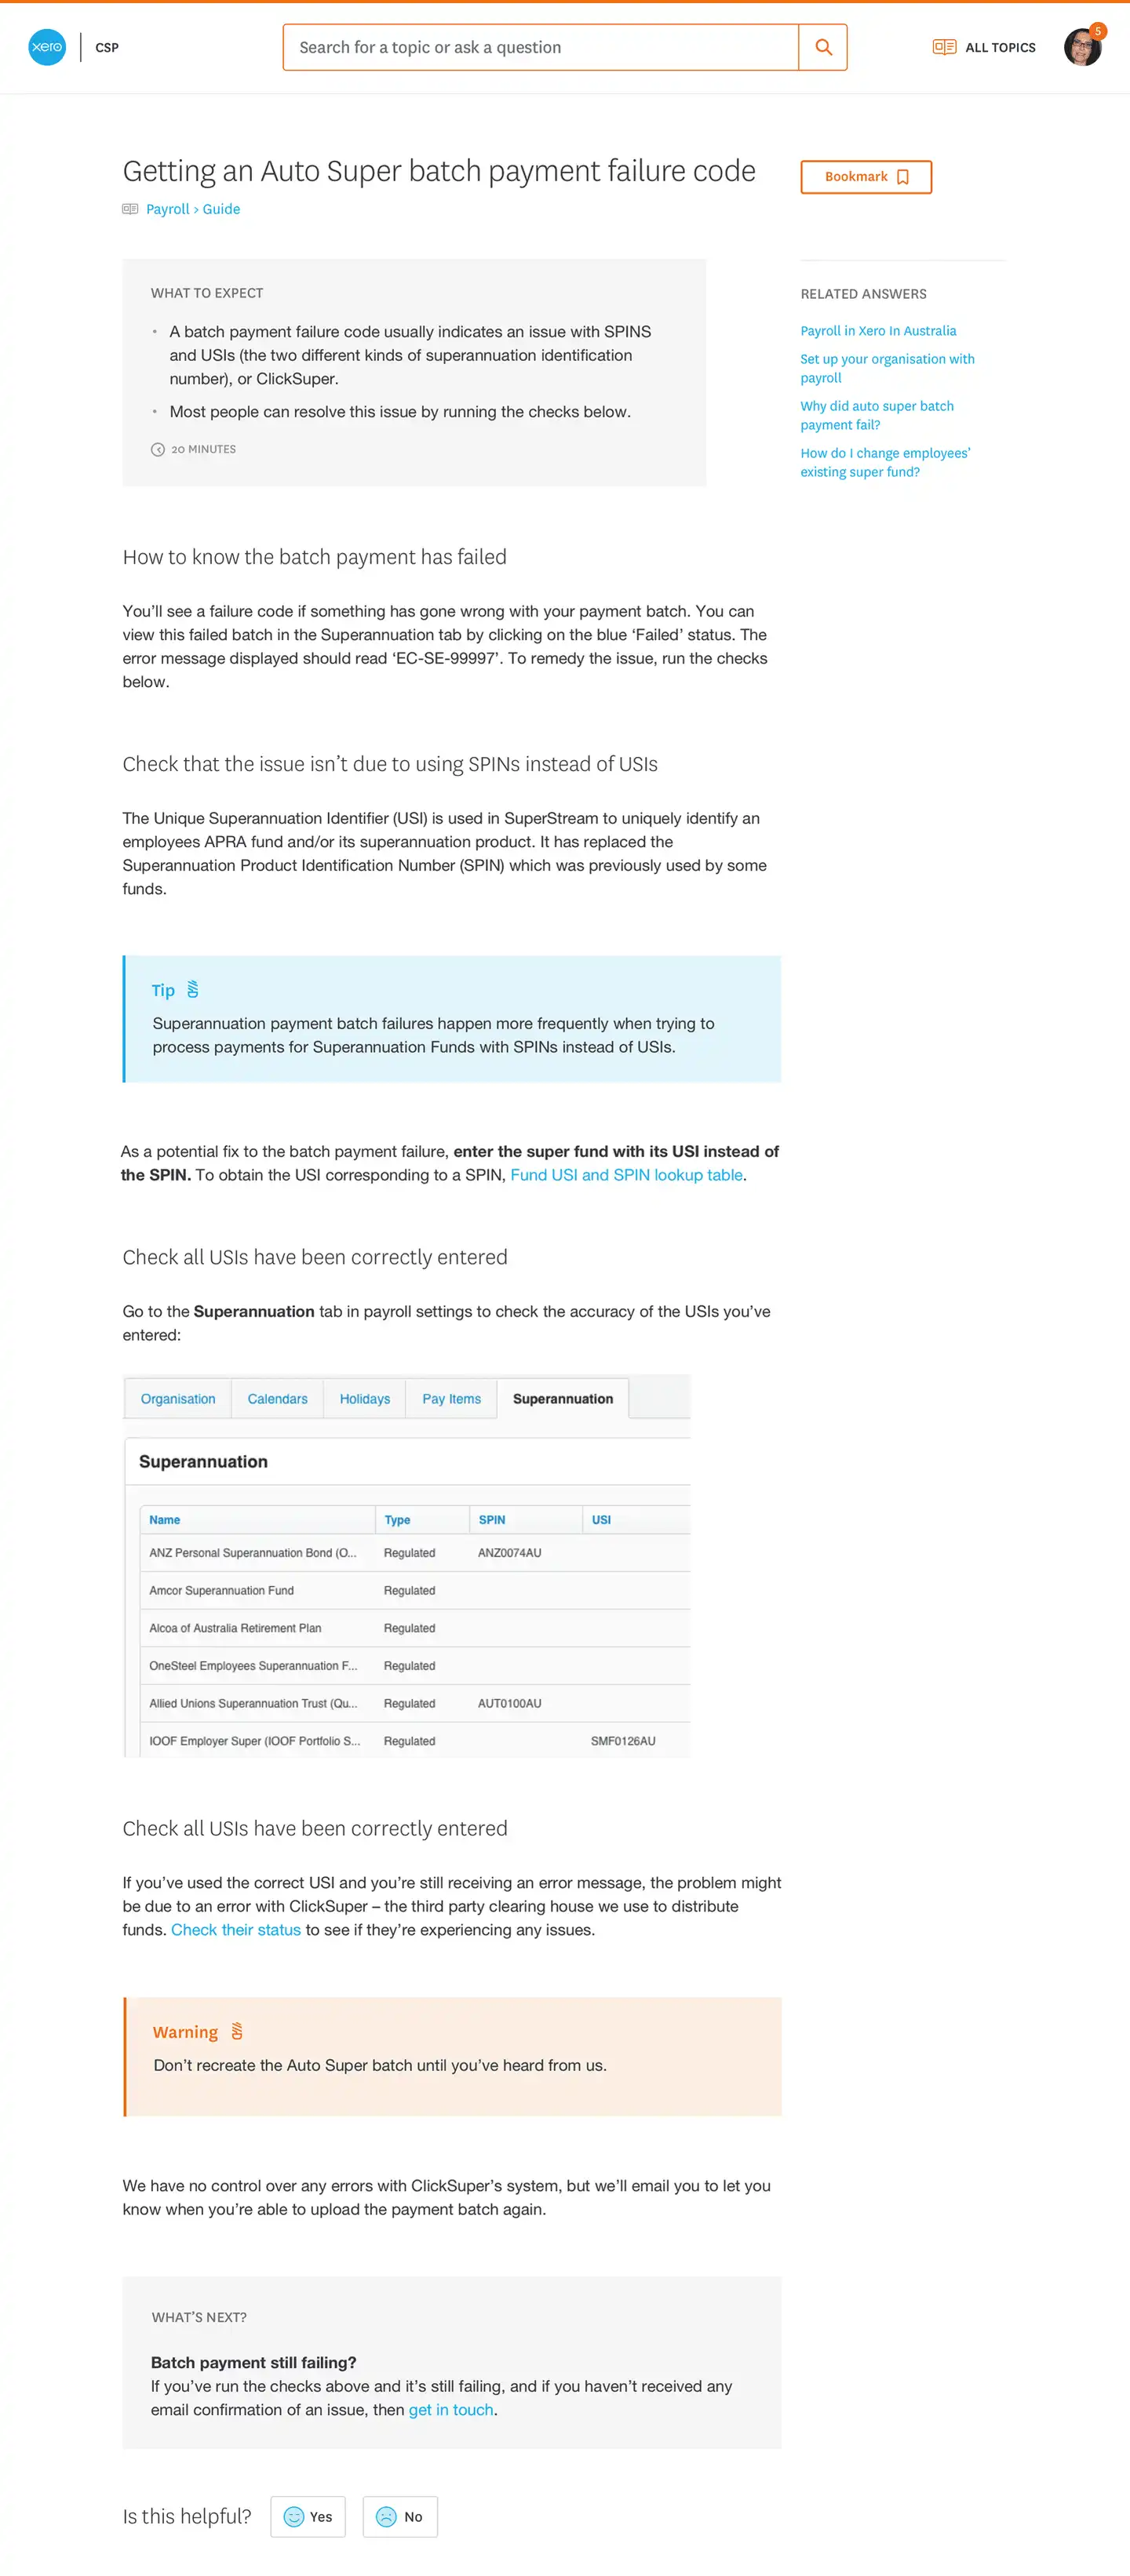 Xero support's discussion page